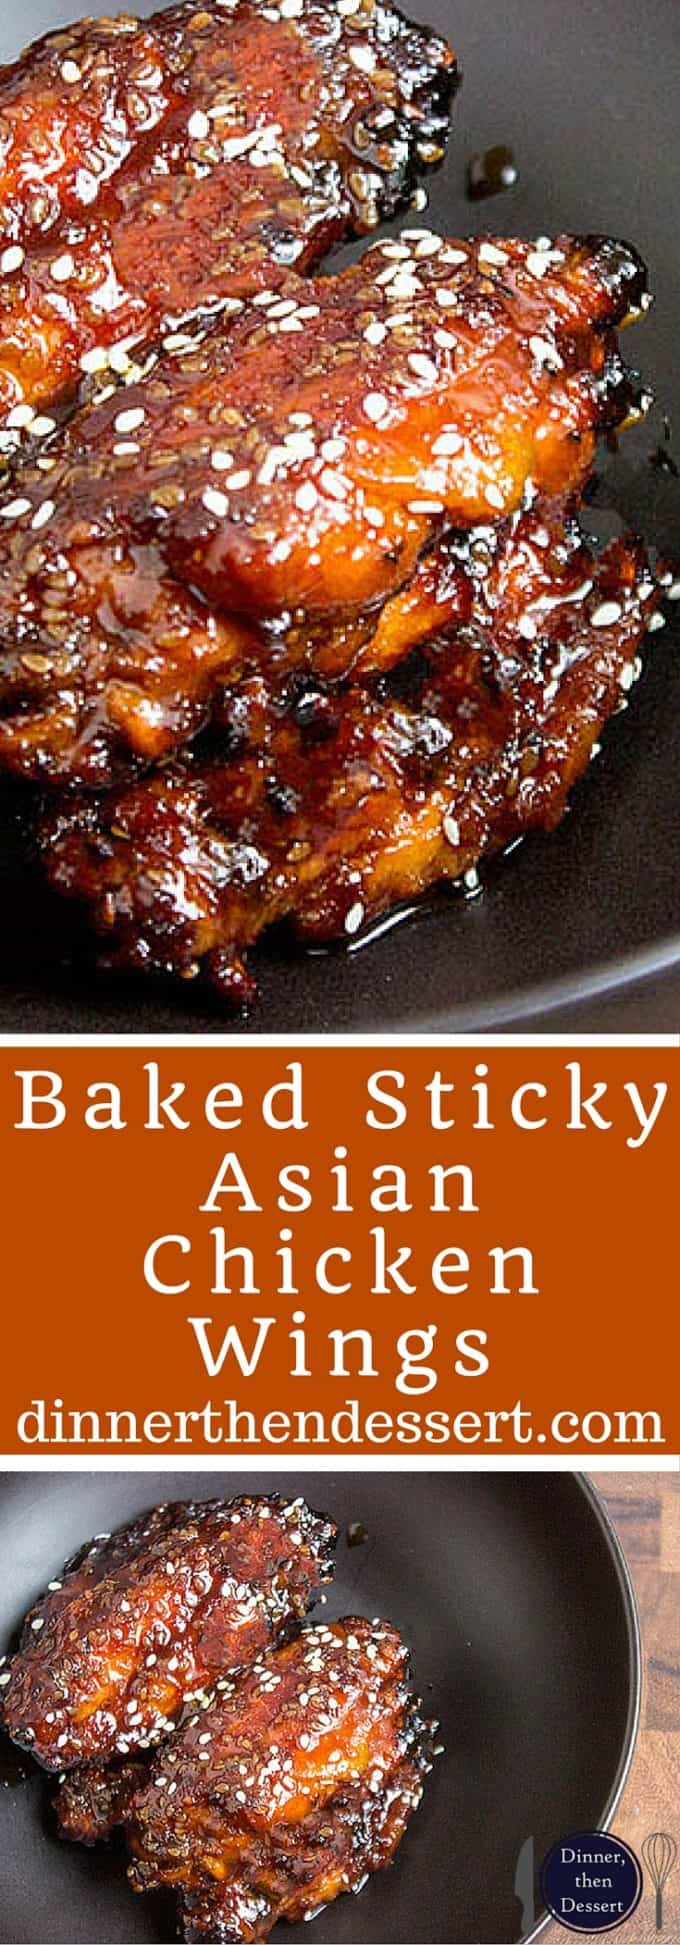 Sticky Asian chicken wings made with a hoisin take on a Mongolian beef marinade. They're sweet, savory, garlicky, just plain awesome and basically begging to be made for your Superbowl party!